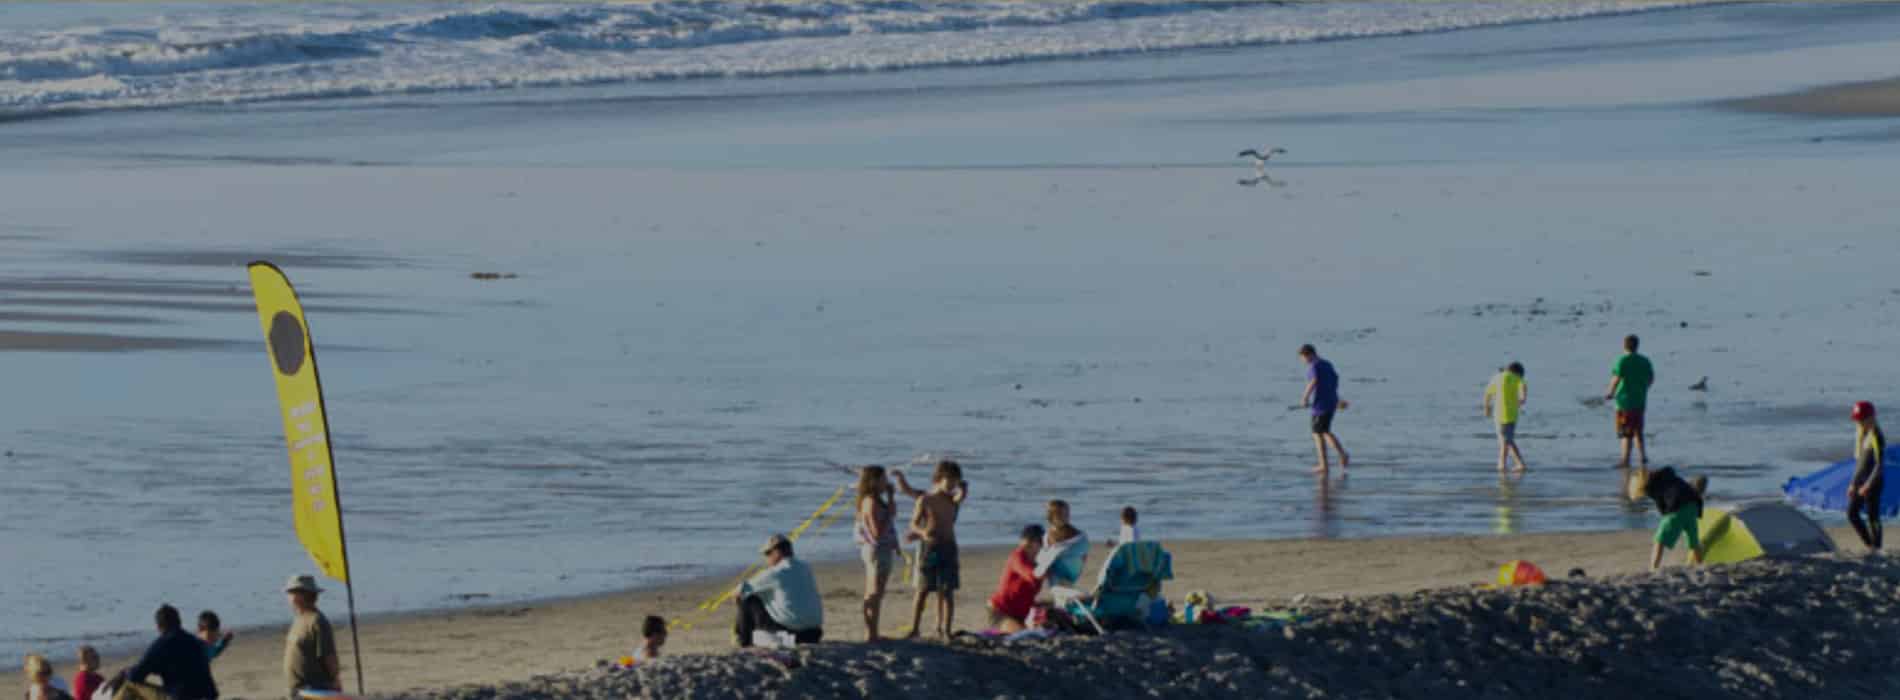 Families swimming and fishing at Moonlight State Beach in Encinitas San Diego. Discover homes for sale opportunities with the best real estate agents